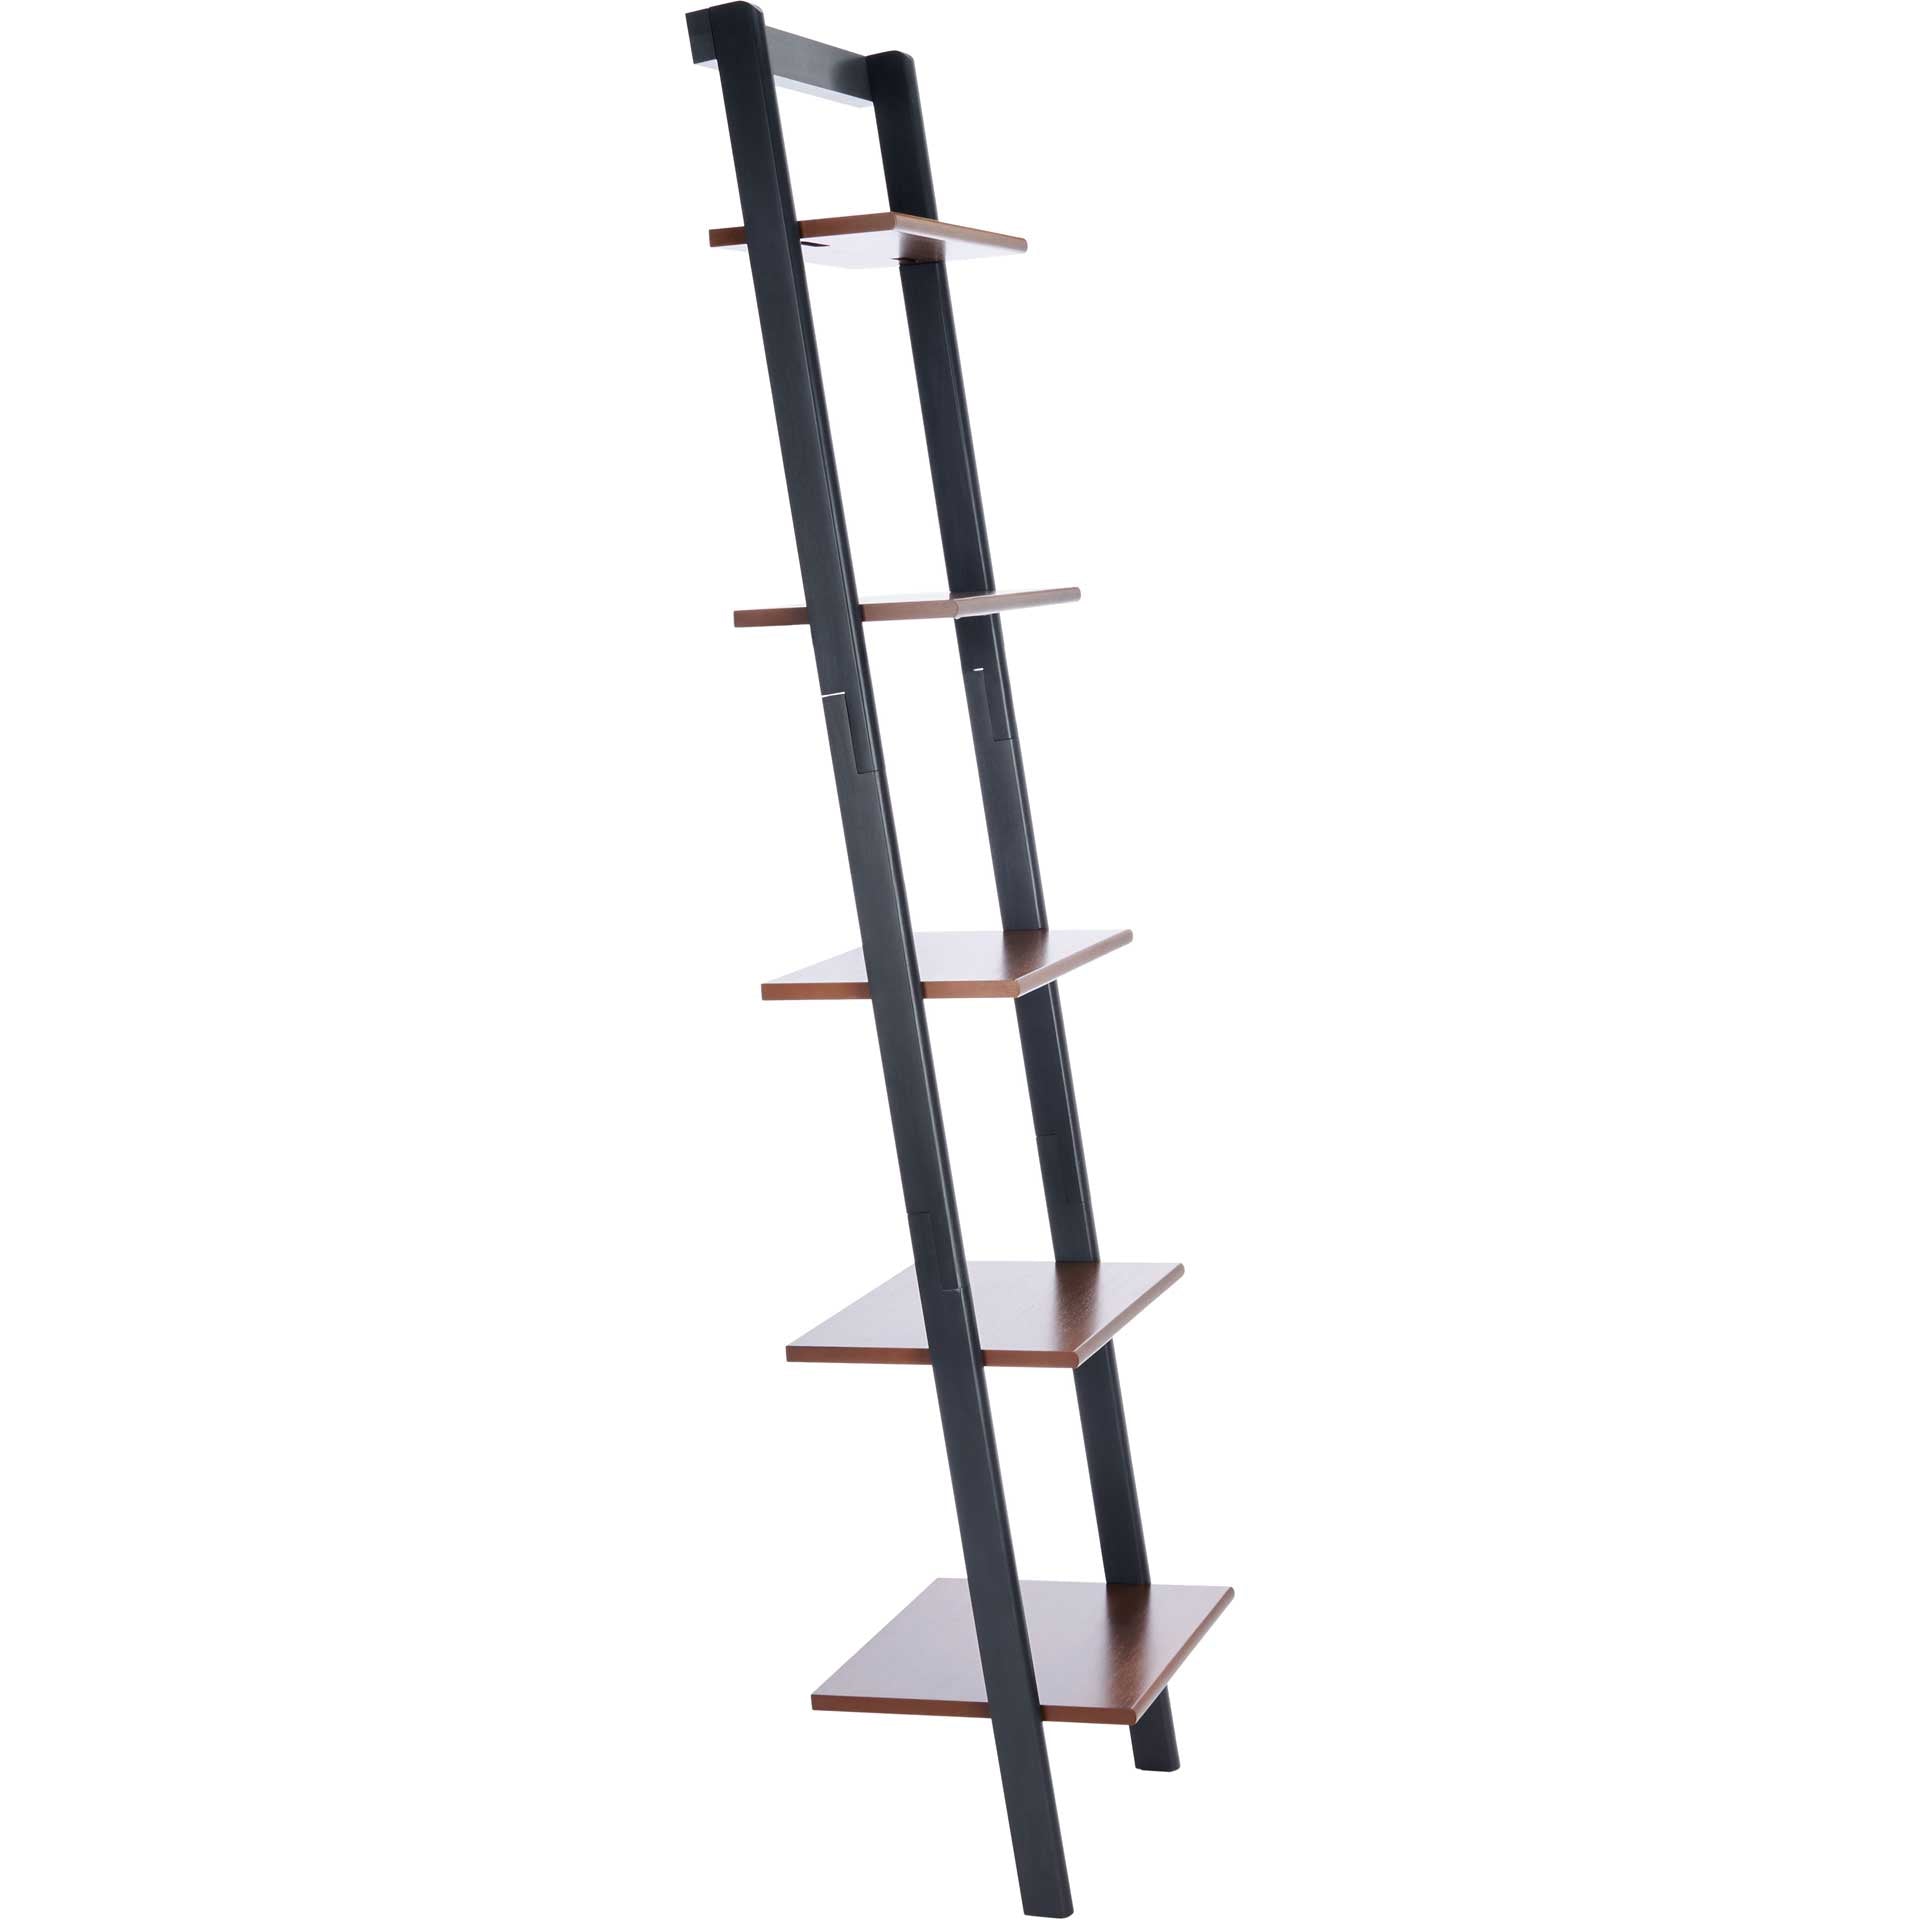 Albina 5 Tier Leaning Etagere Honey Brown/Charcoal